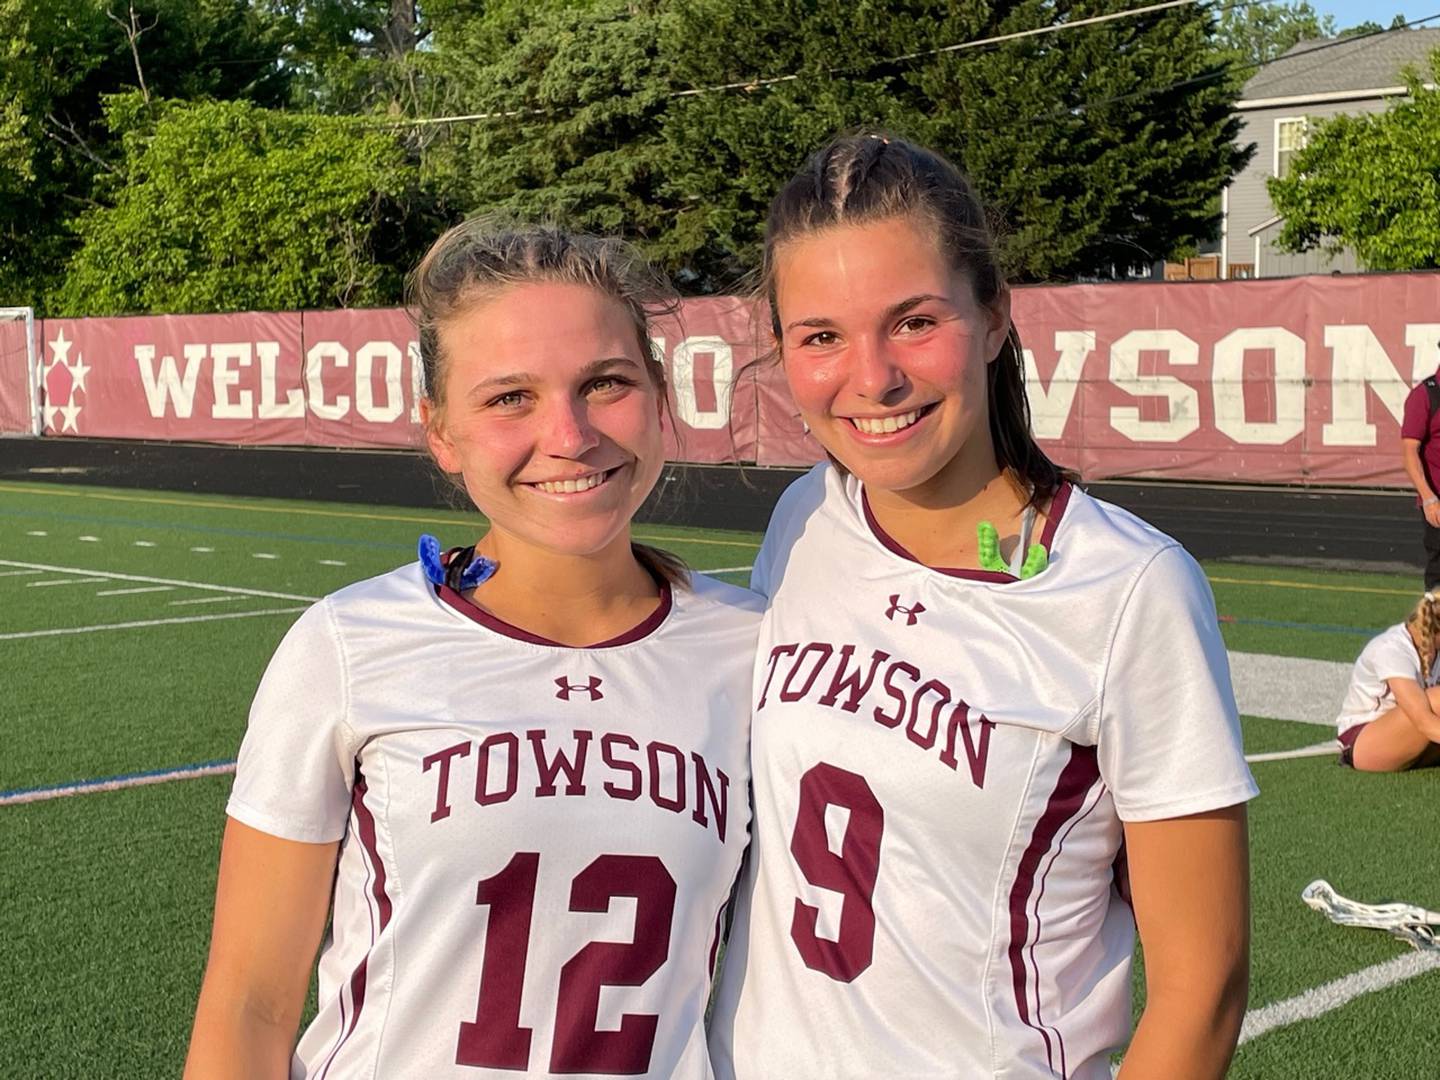 Towson seniors Brigid Vaikness (12) and Averry Briggs (9) played key roles in leading the No. 11 Generals to a 13-4 victory over Catonsville in the Class 3A state girls lacrosse semifinals Wednesday evening. Vaikness took the draw, helping the Generals dominate possession especially in the first half. Briggs scored three goals and had four assists to boost the Generals into the state quarterfinals for the first time since 2008.